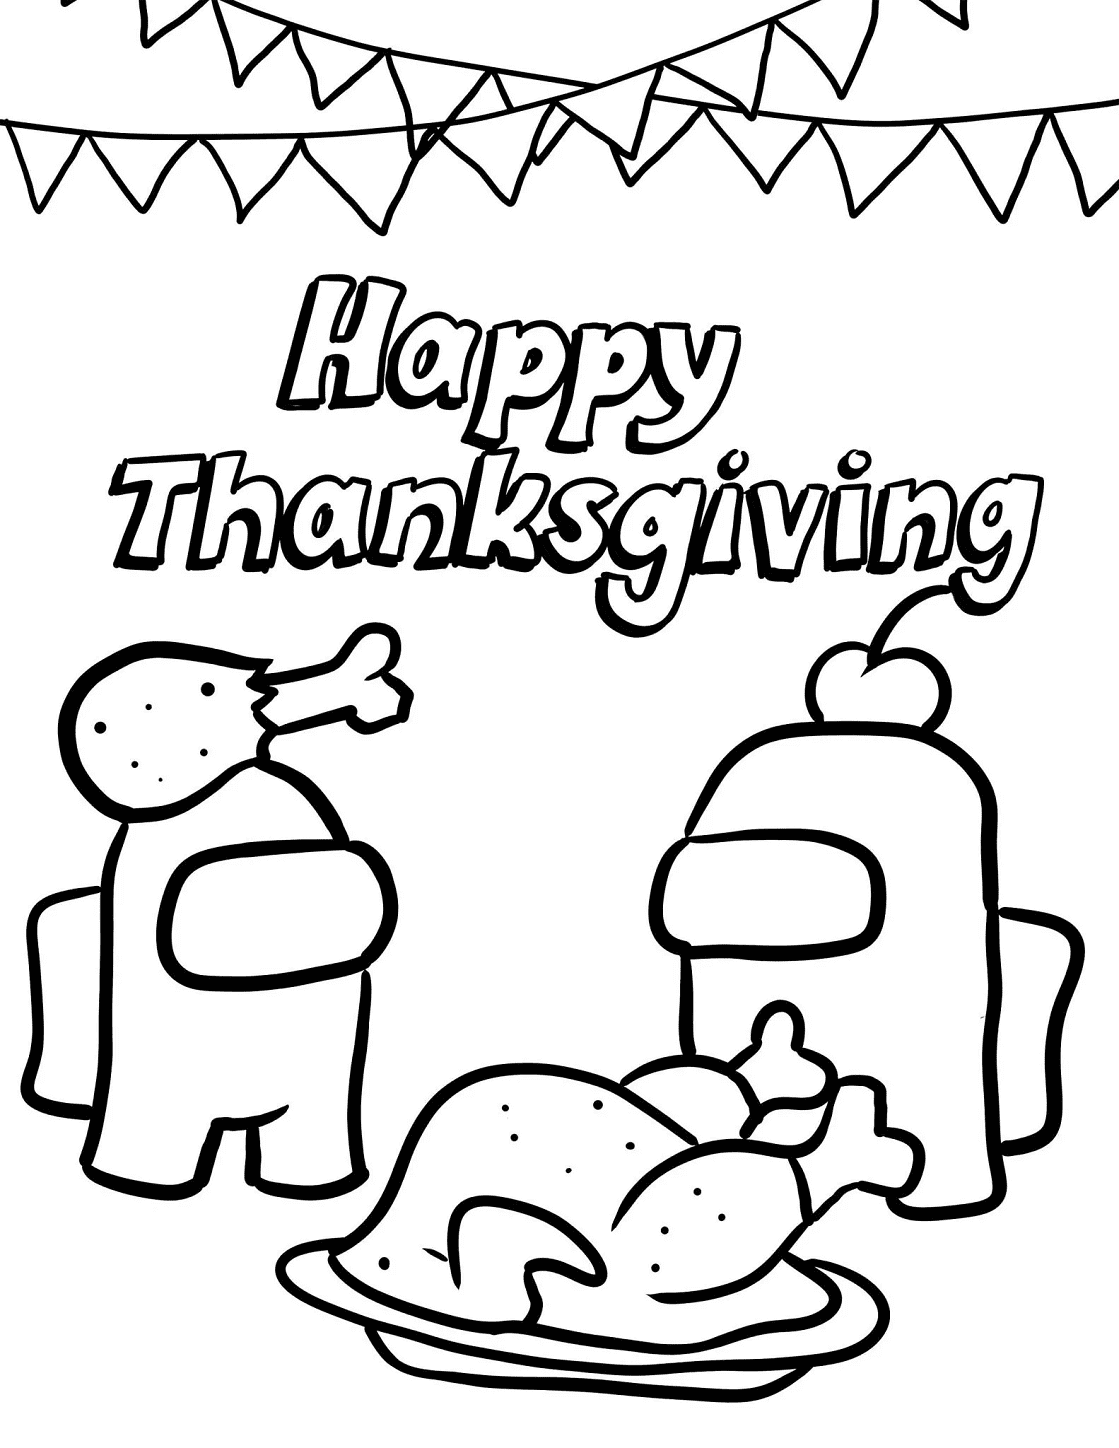 Thanksgiving Among Us Coloring Pages   Among Us Coloring Pages ...